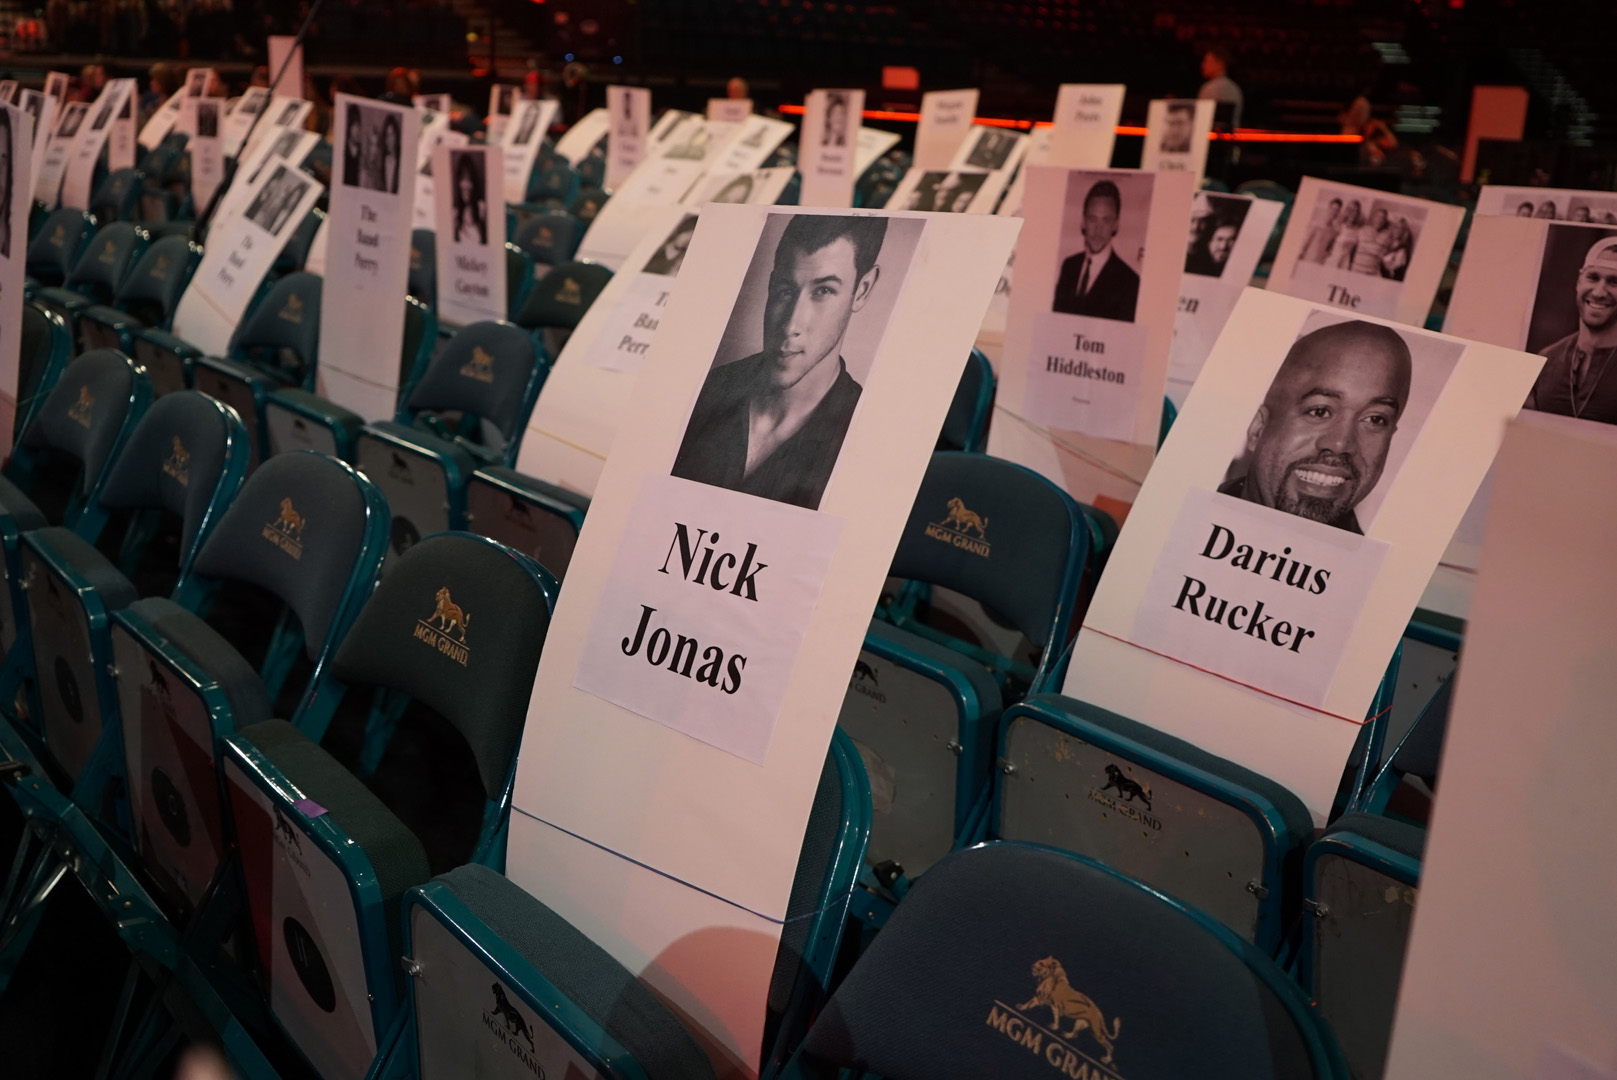 Nick Jonas and Darius Rucker will sit close together at the 51st Academy of Country Music Awards.